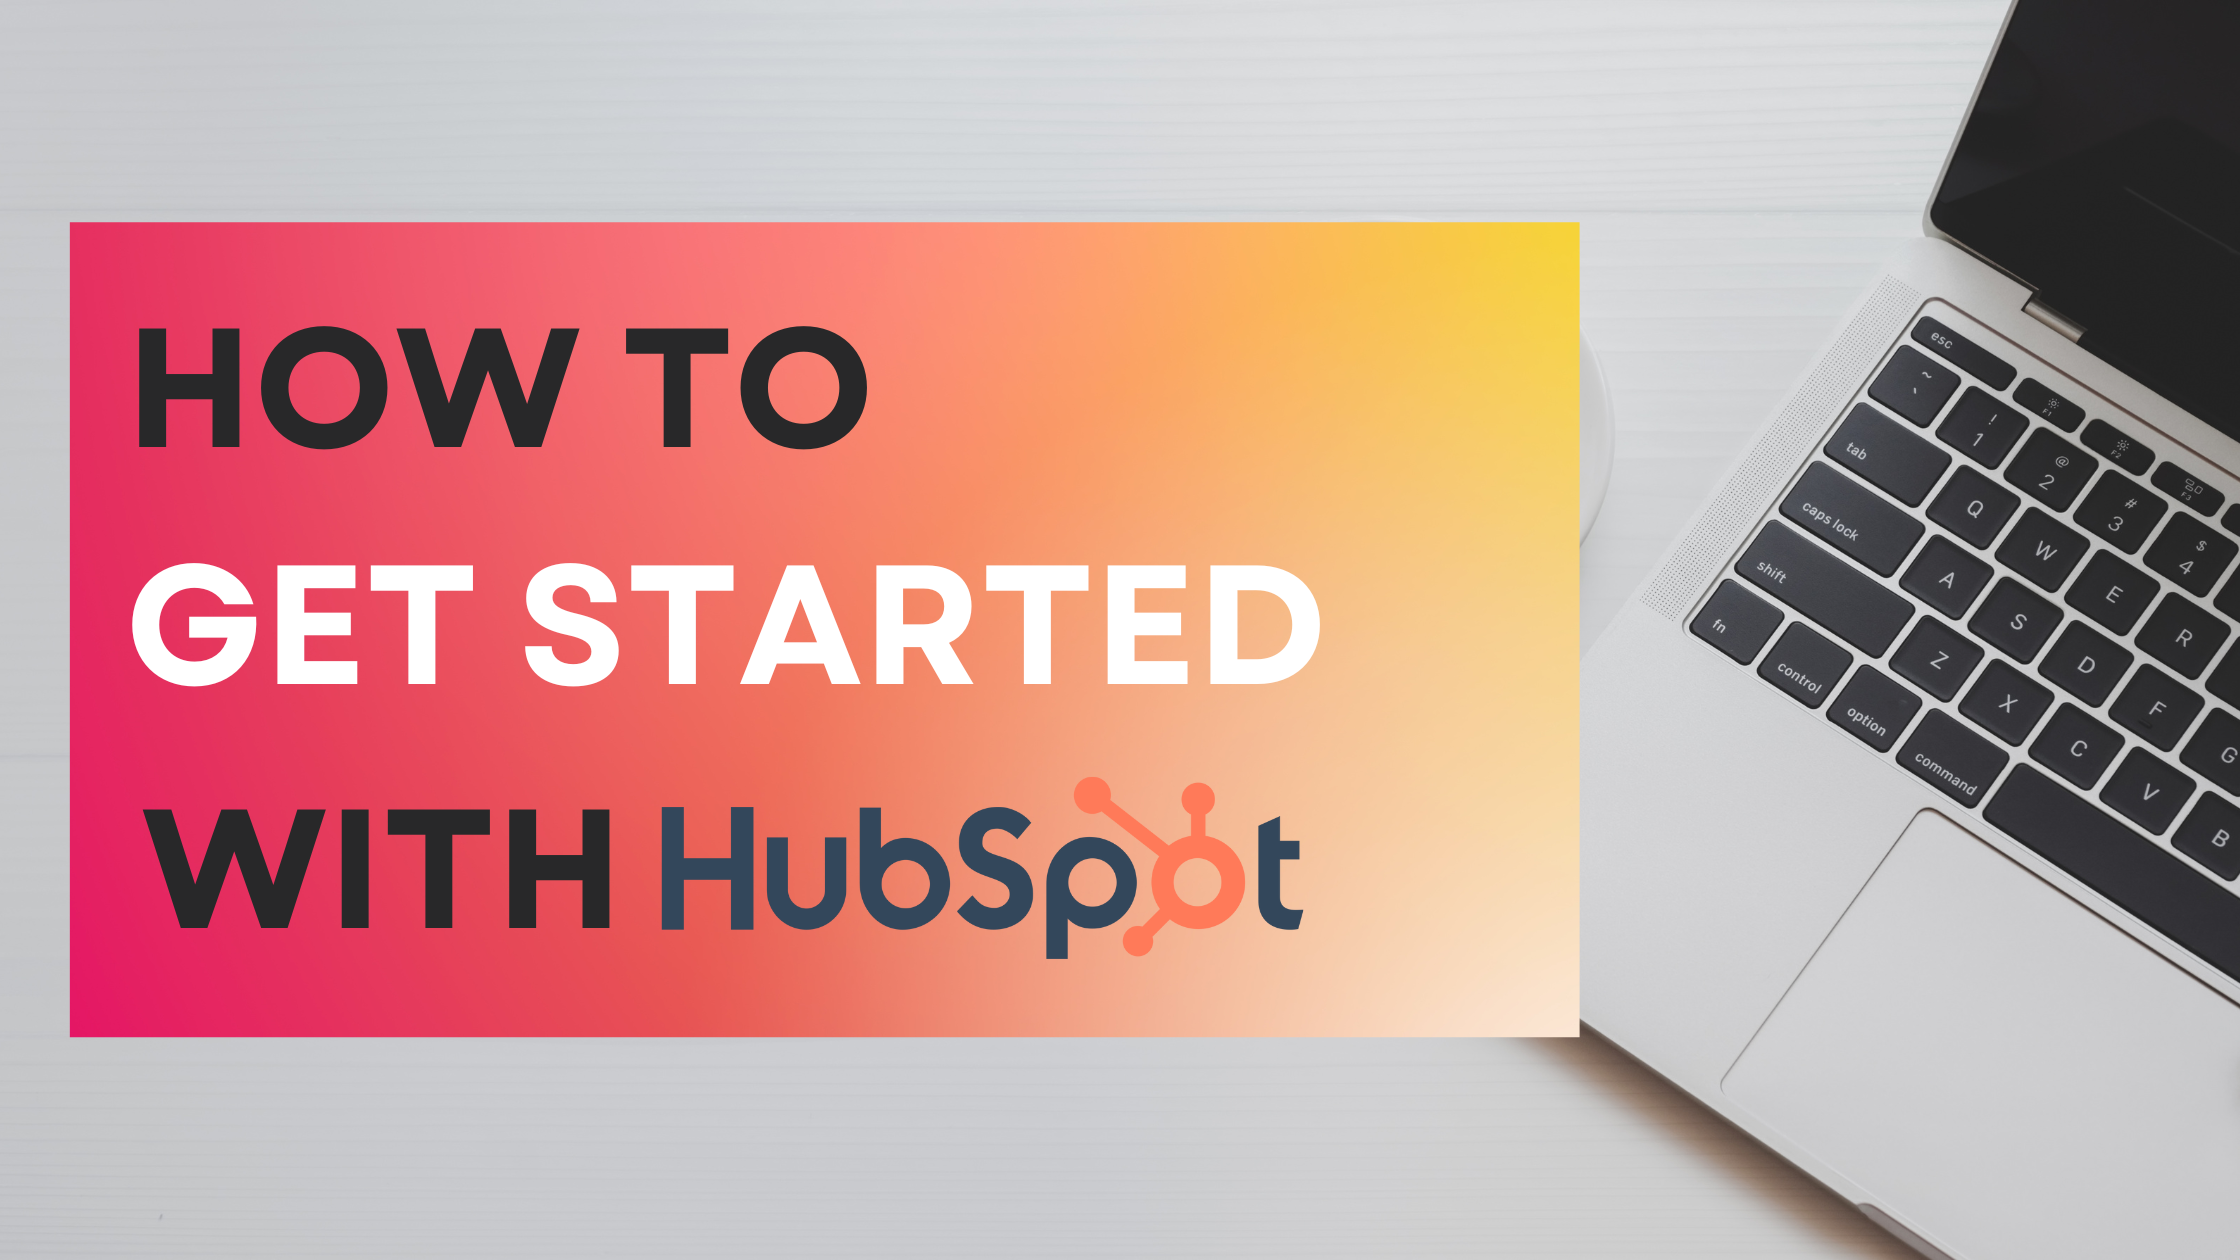 How to get started with HubSpot